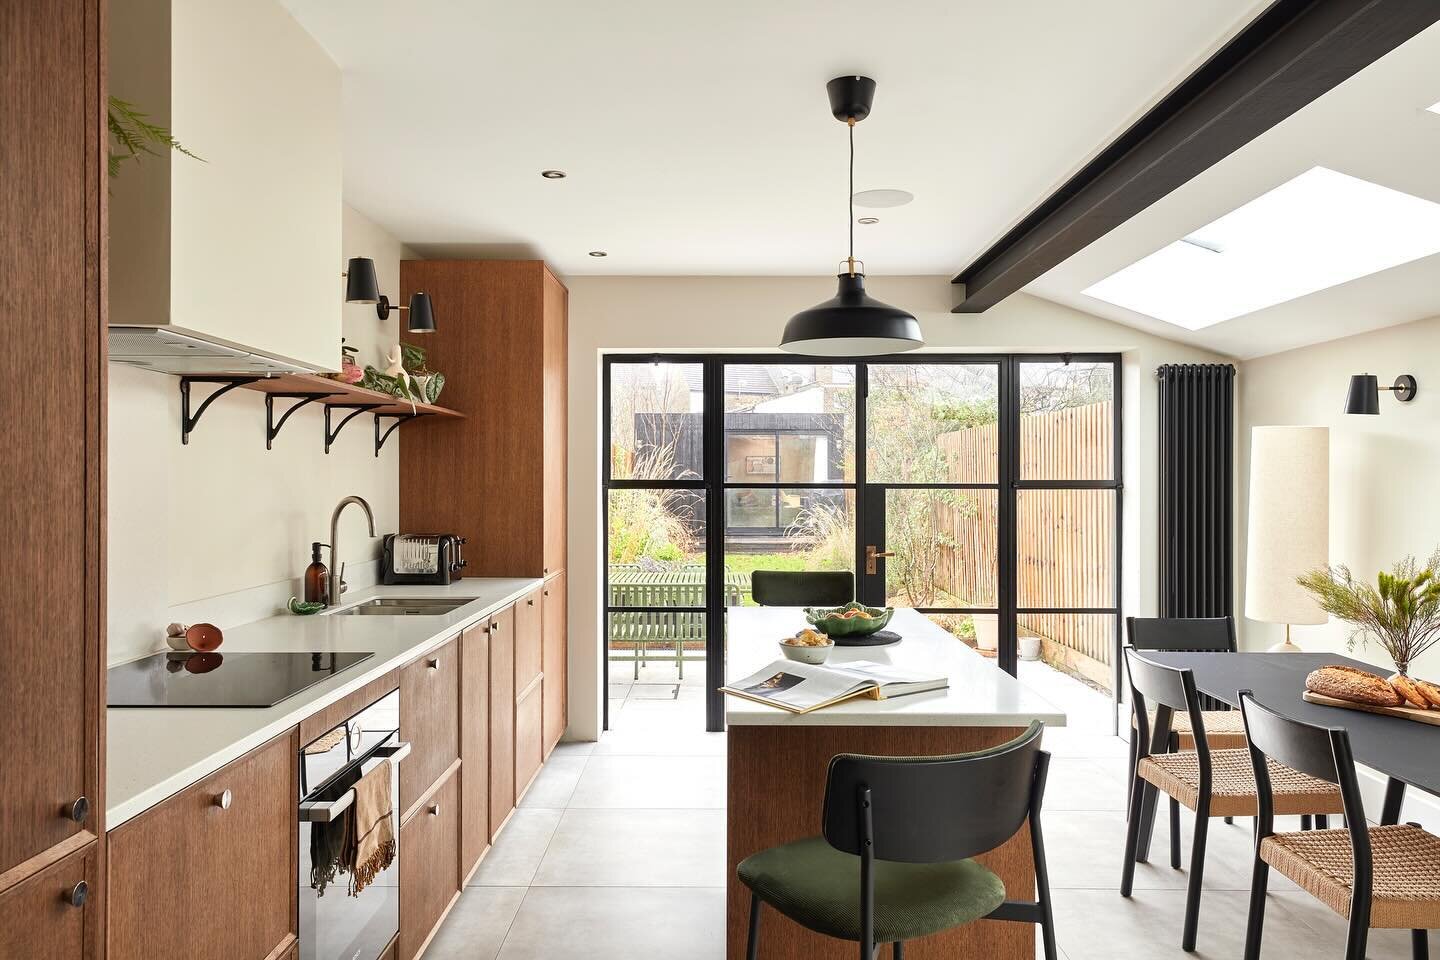 A serene view towards the garden with an elegant kitchen and dining area.

Photo: @snookphotograph 
Interior Design: @palmer_and_stone 
Build: @addspacelondon 

#architecture #design #home #homedesign #homeinspiration #designinspo #homeinspo #archite